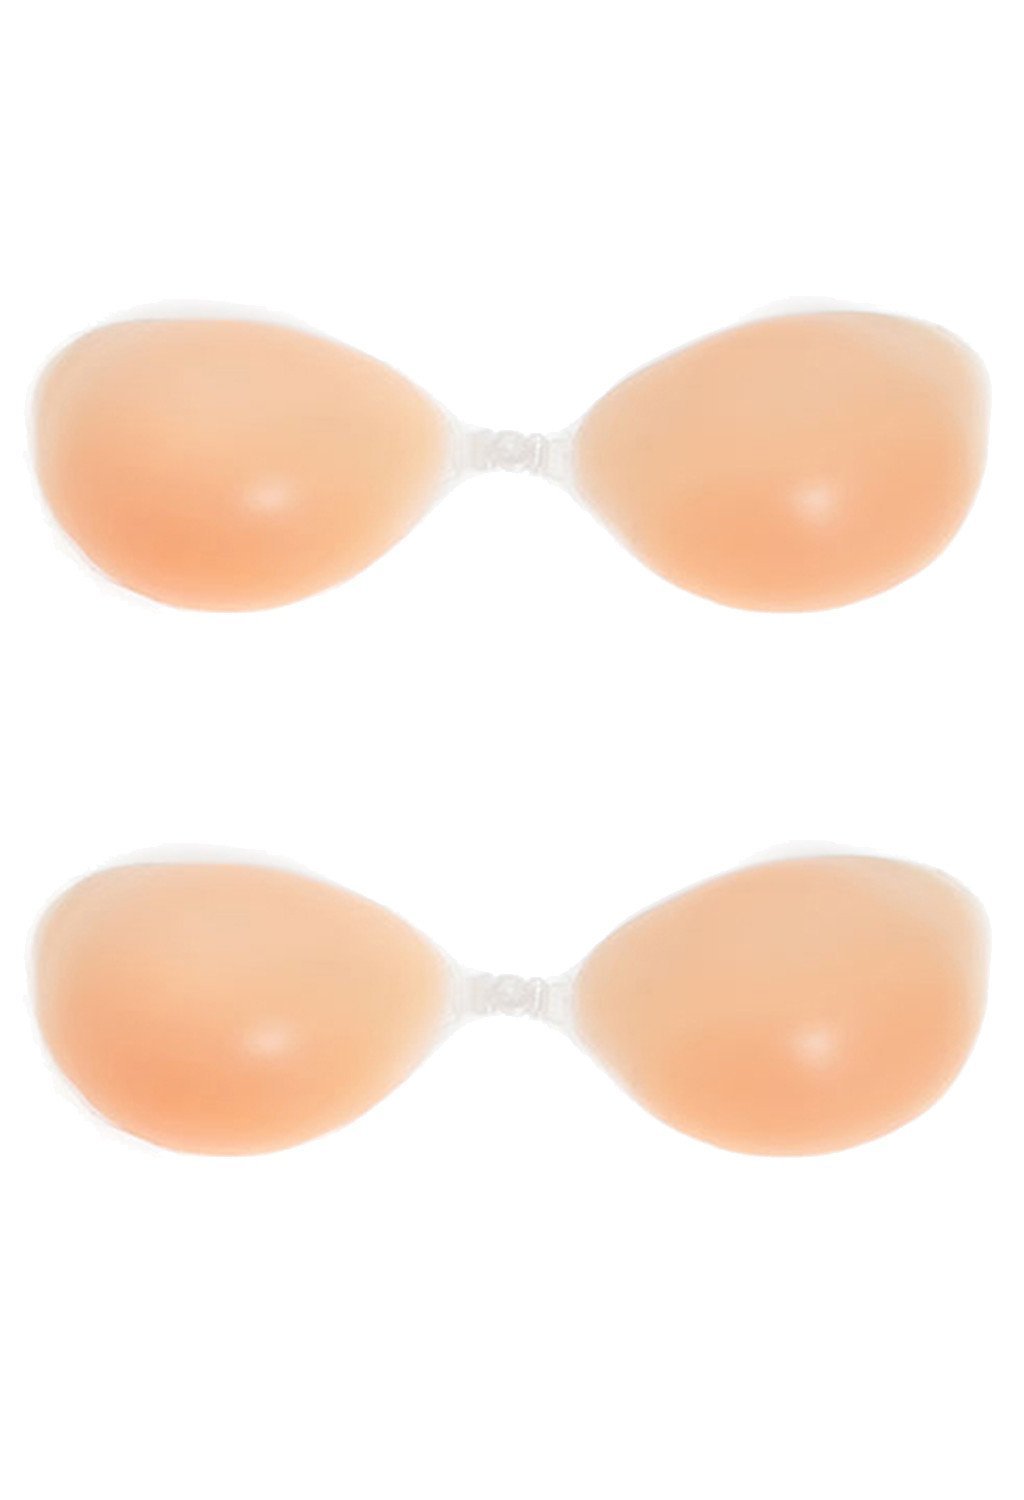 Wholesale silicone breast inserts In Many Shapes And Sizes 